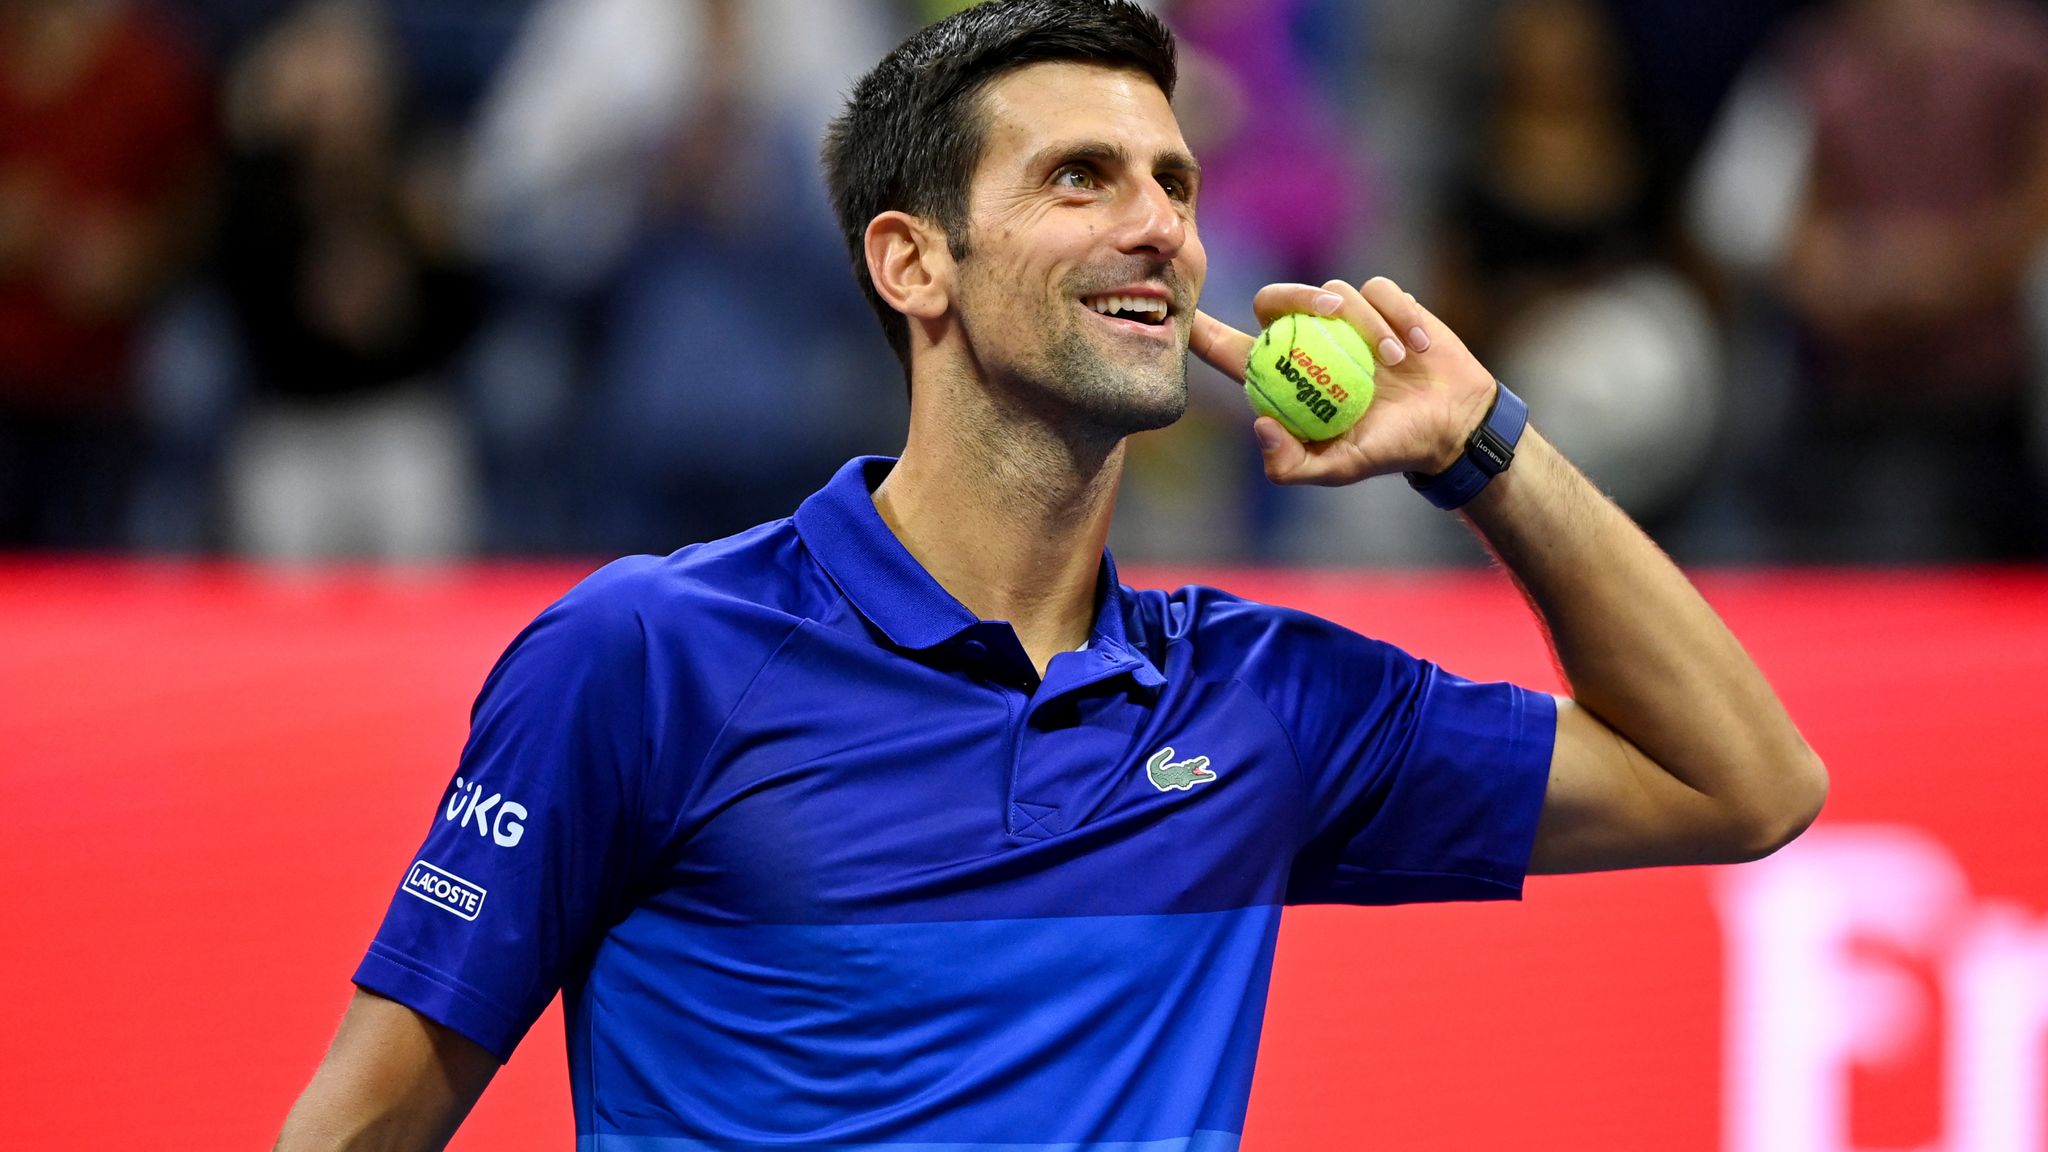 Novak Djokovic vs Jenson Brooksby in US Open 2021 live stream- preview, head to head record, all you need to know